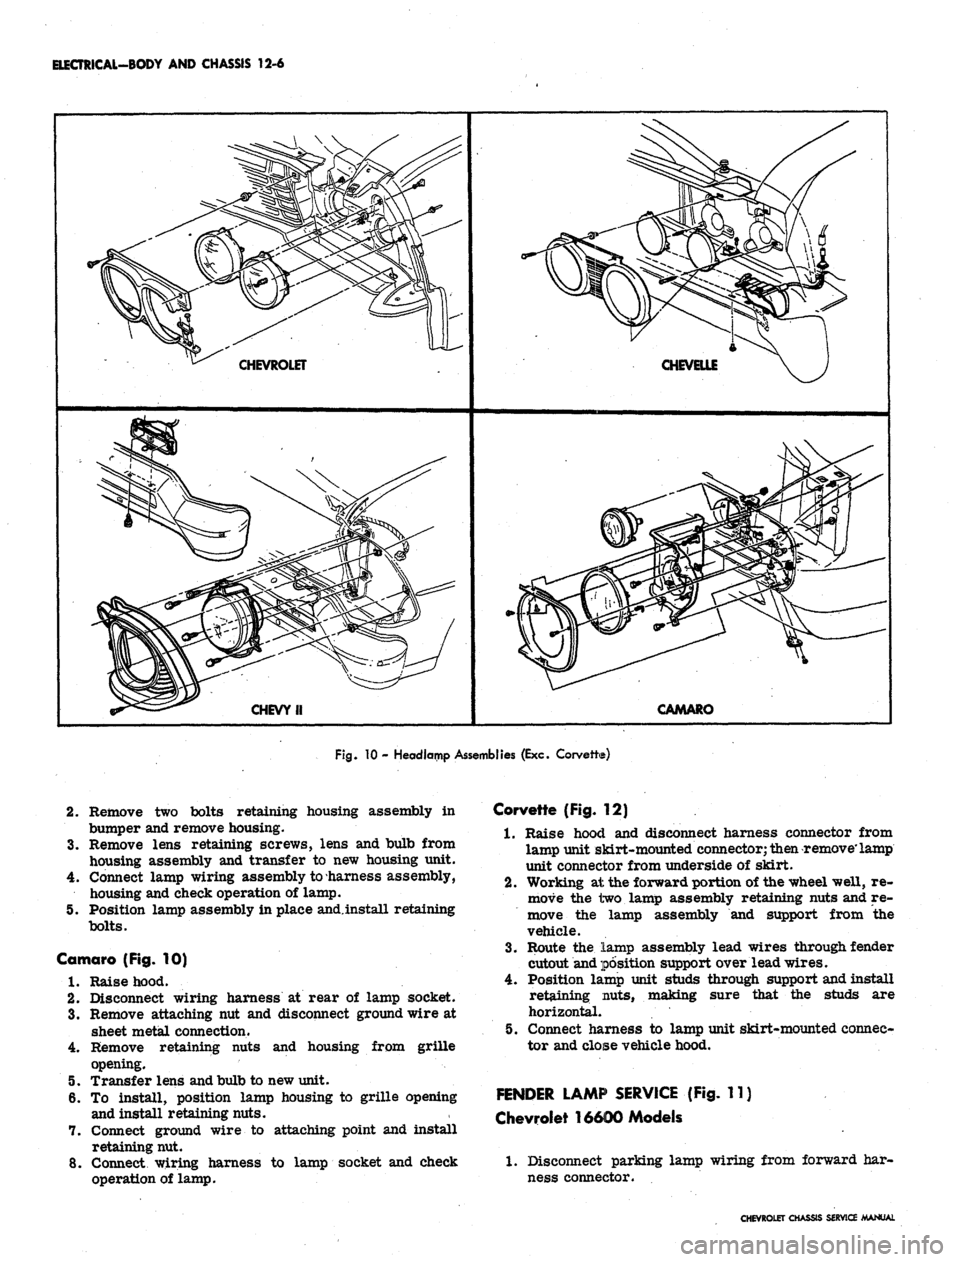 CHEVROLET CAMARO 1967 1.G Chassis User Guide 
ELECTRICAL-BODY AND CHASSIS 12-6

\ \

CHEVROLET 
CHEVELLE

CHEVY II 
CAMARO

Fig.
 10 - Headlamp Assemblies (Exc. Corvette)

1.
2.
 Remove two bolts retaining housing assembly in Corvette (Fig. 12)
